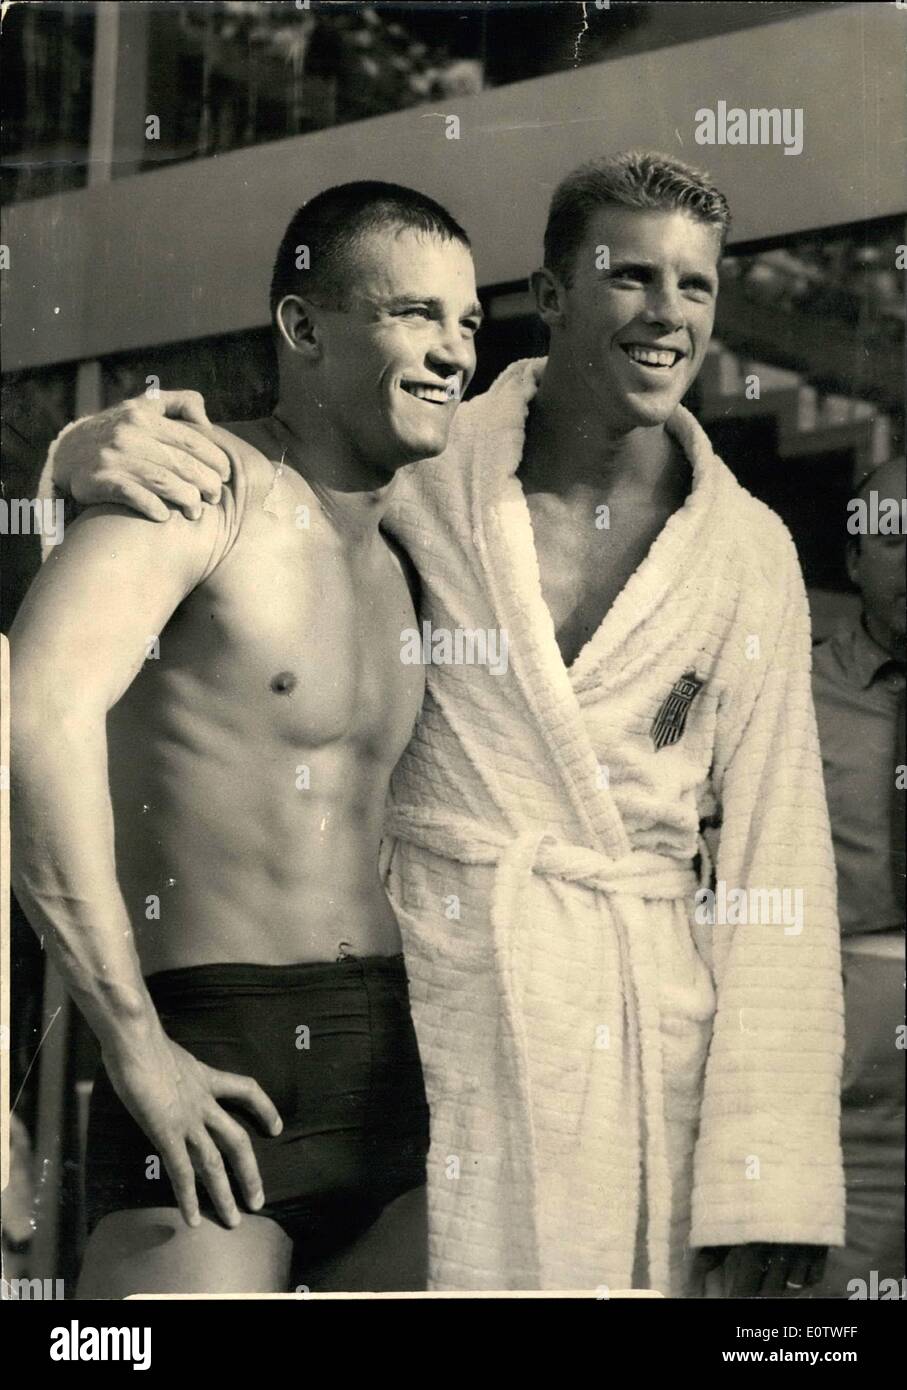 Aug. 08, 1960 - Americas takes first and second final: Gary Tobian of the for winning final of the 3 m. countryman S. Hall second. J Boti Photo shows G. Tobian (right) their great victory thi Stock Photo